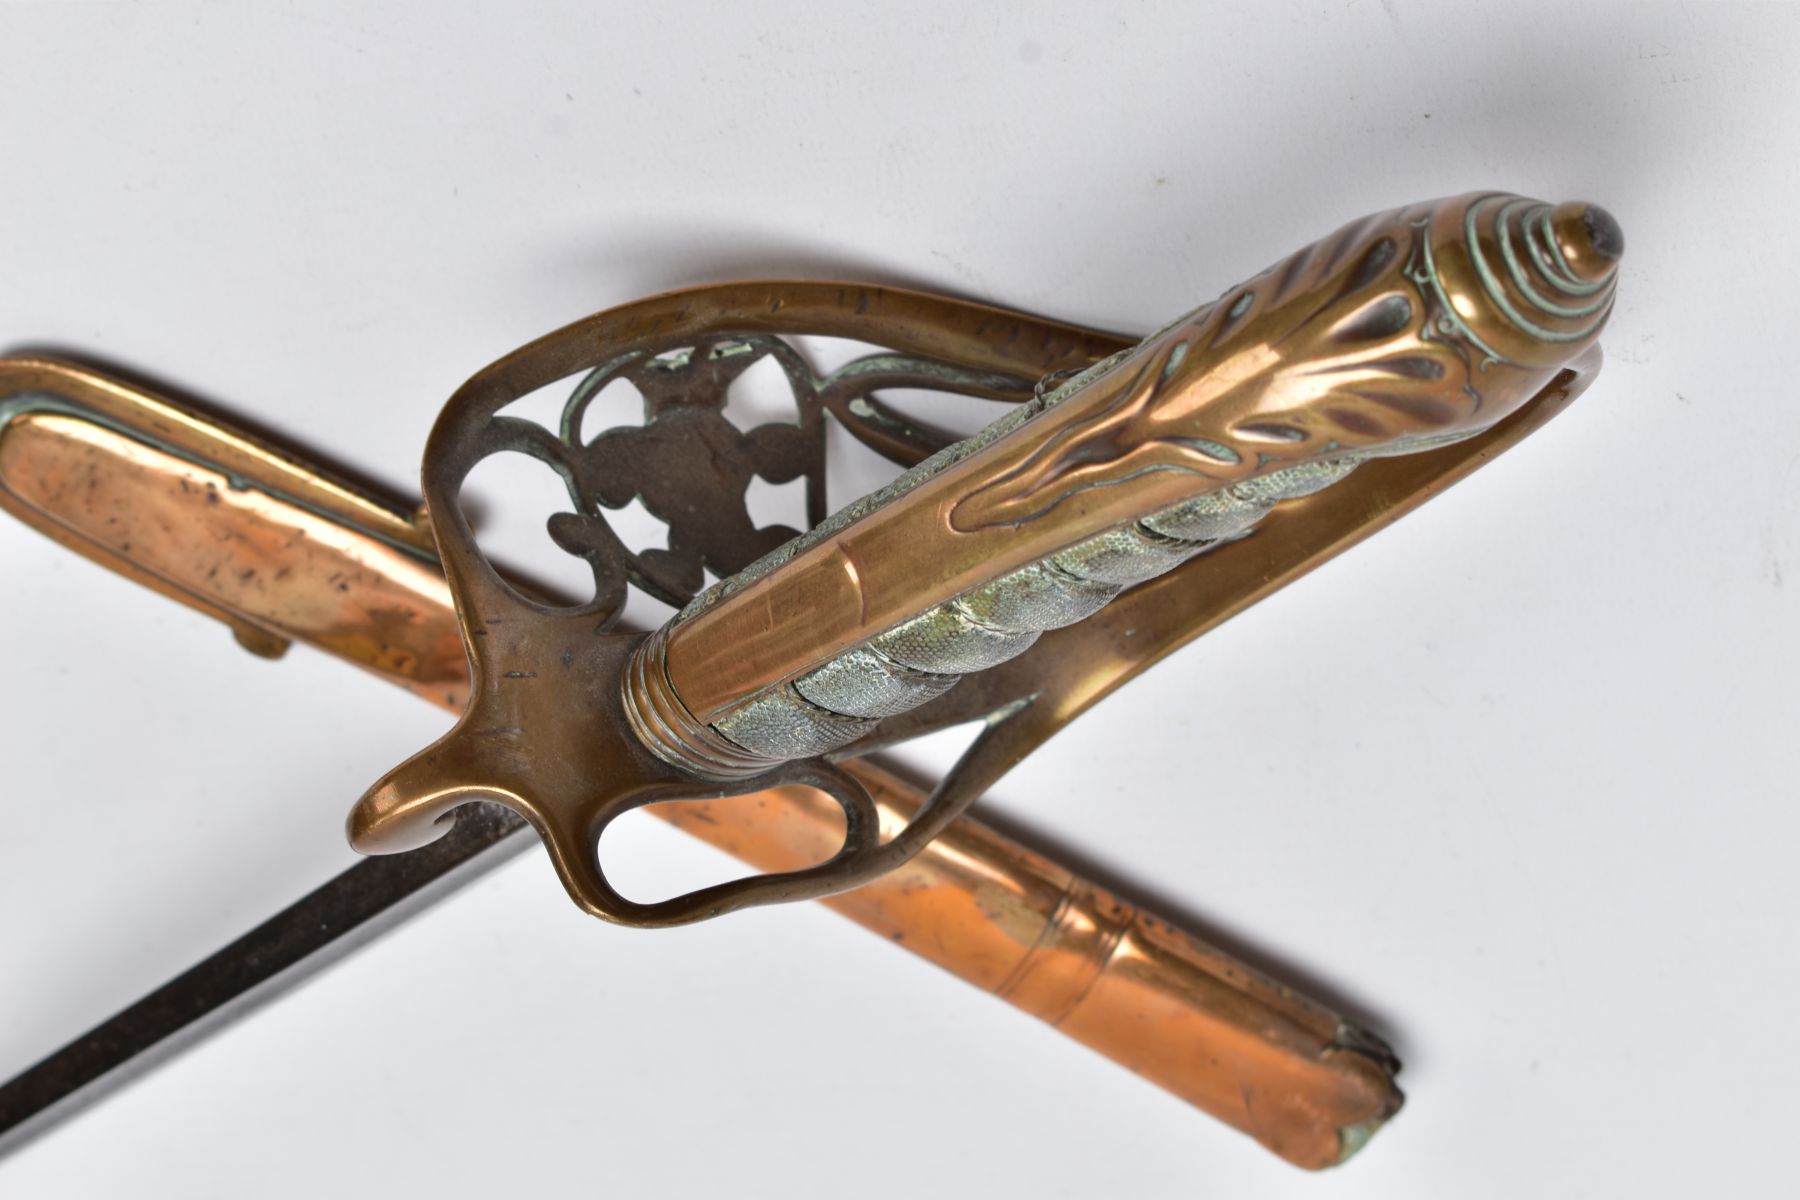 A BRITISH VICTORIAN ERA INFANTRY OFFICERS SWORD (possibly 1845 pattern), no scabbard apart from - Image 12 of 13